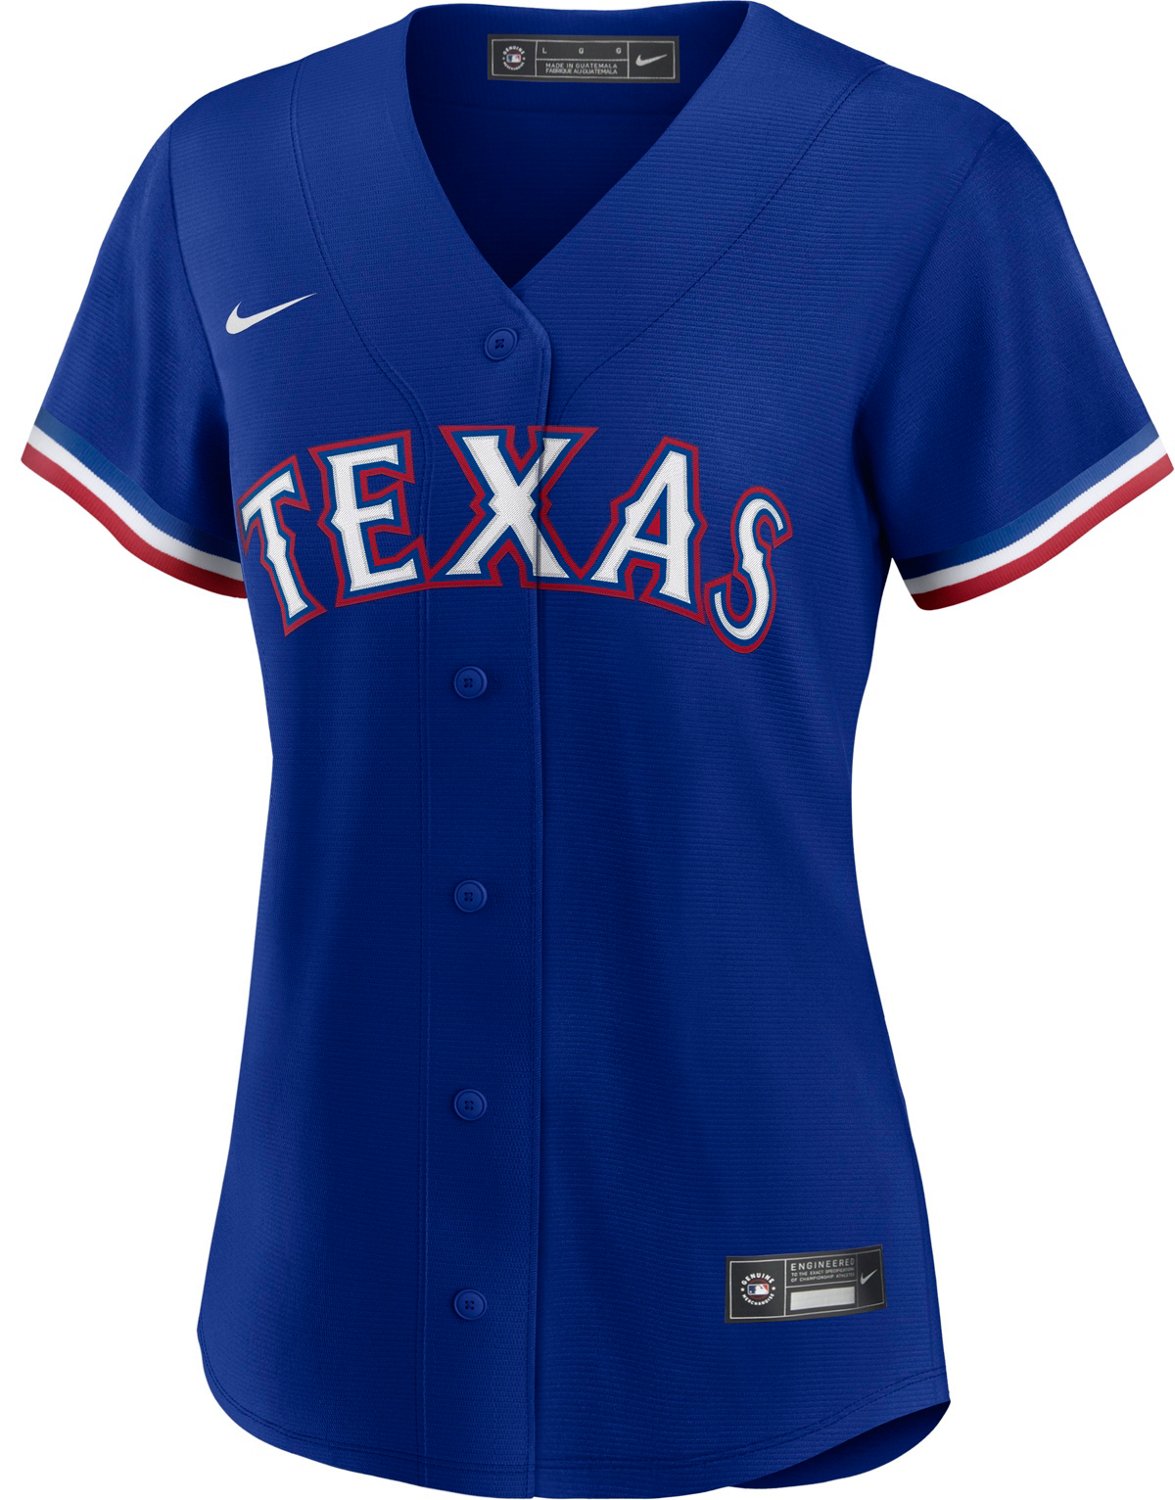  Majestic Adult MLB Replica Crewneck Team Jersey Texas Rangers  Large : Sporting Goods : Sports & Outdoors